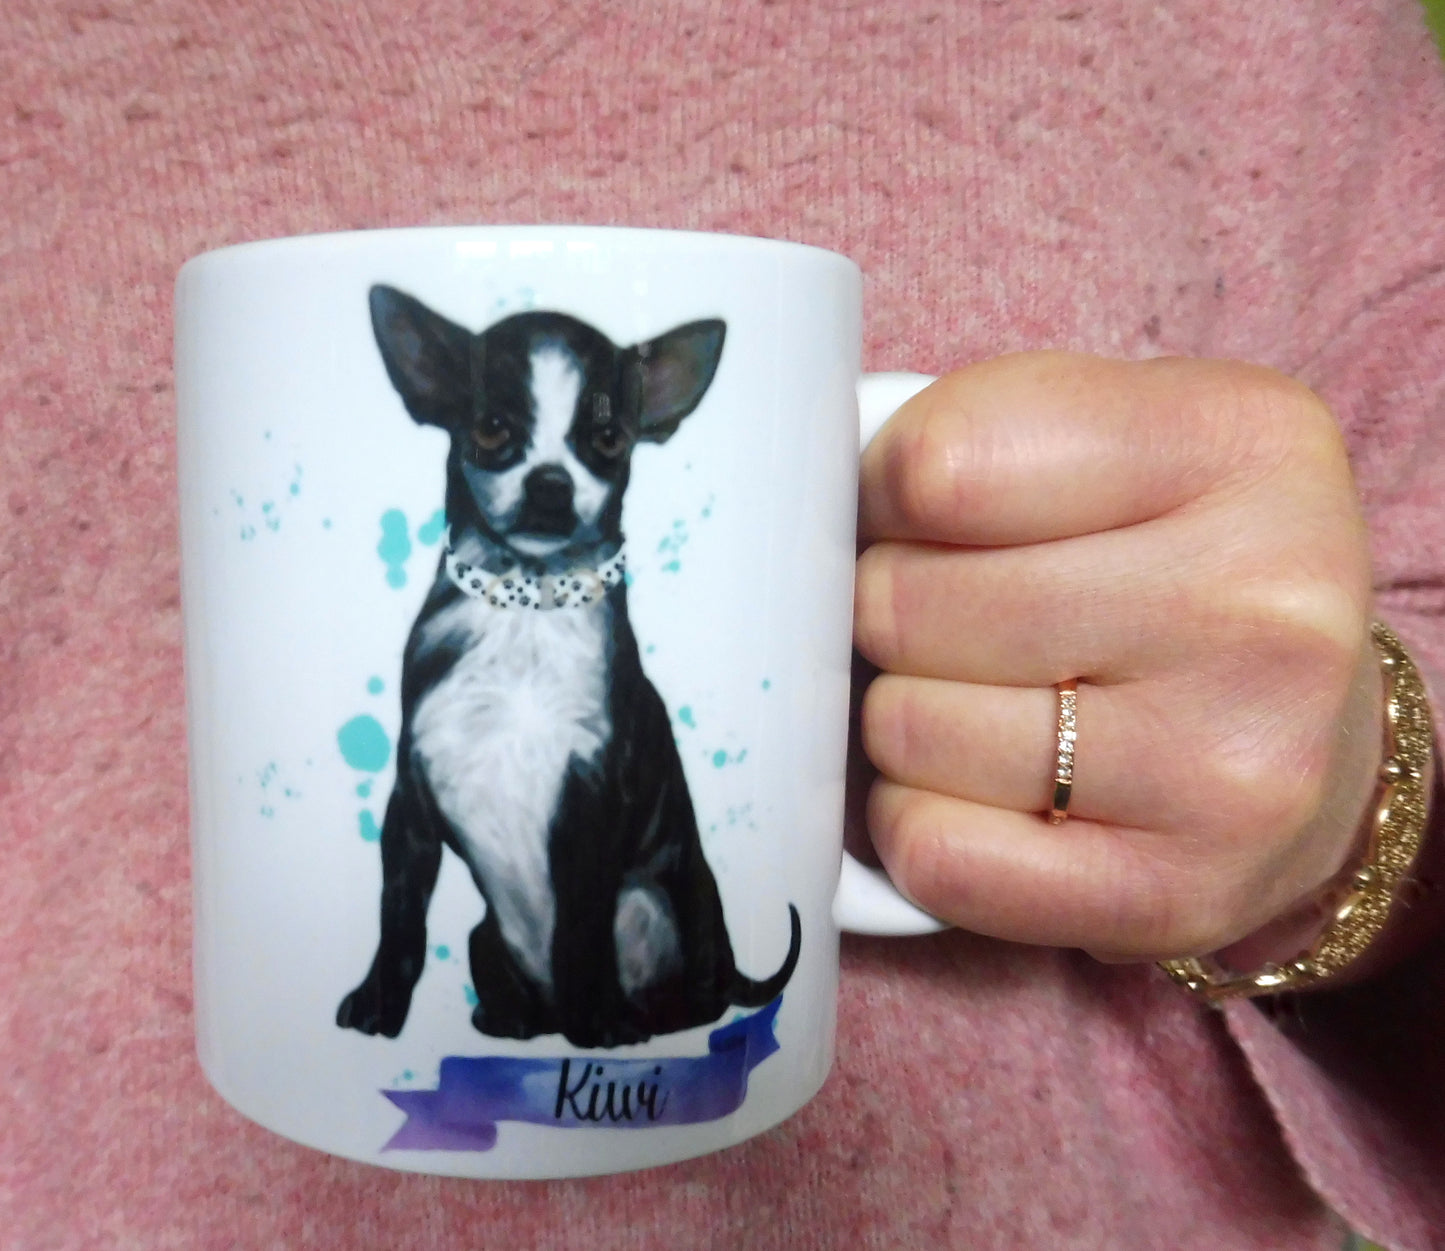 Personalized Poodle dog mug and his first name